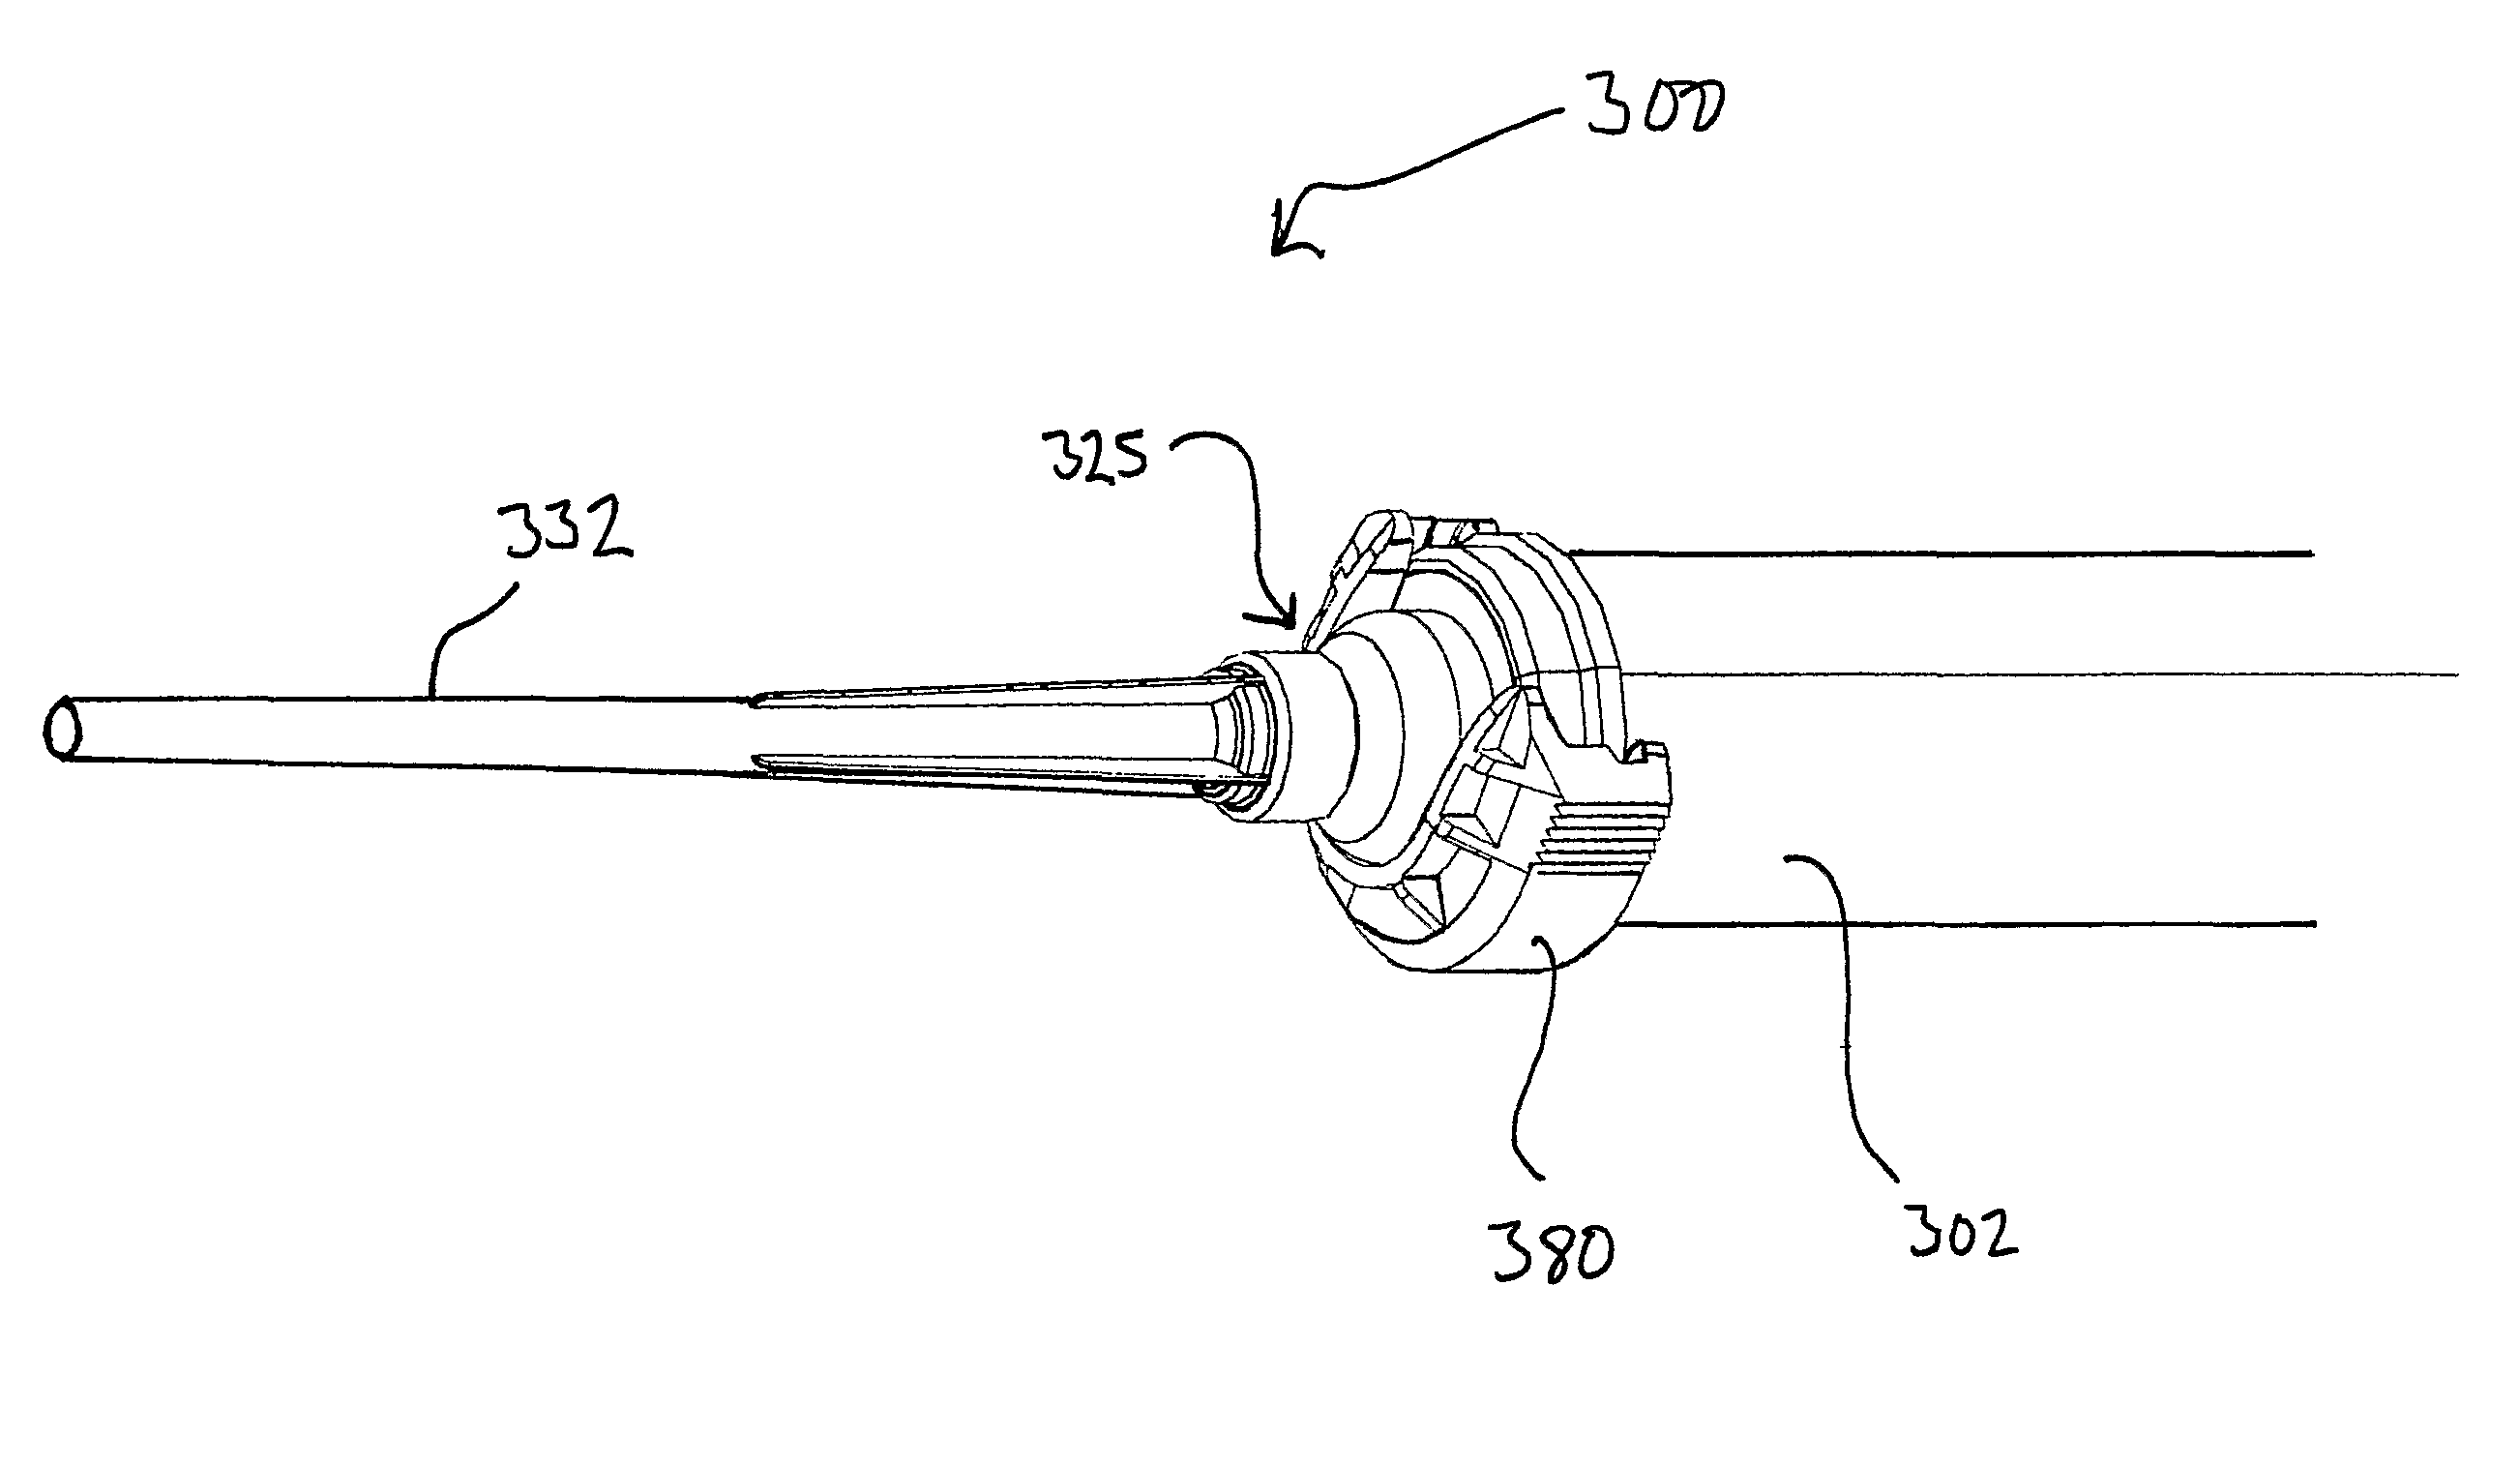 Nozzle and/or adaptor unit on cartridge